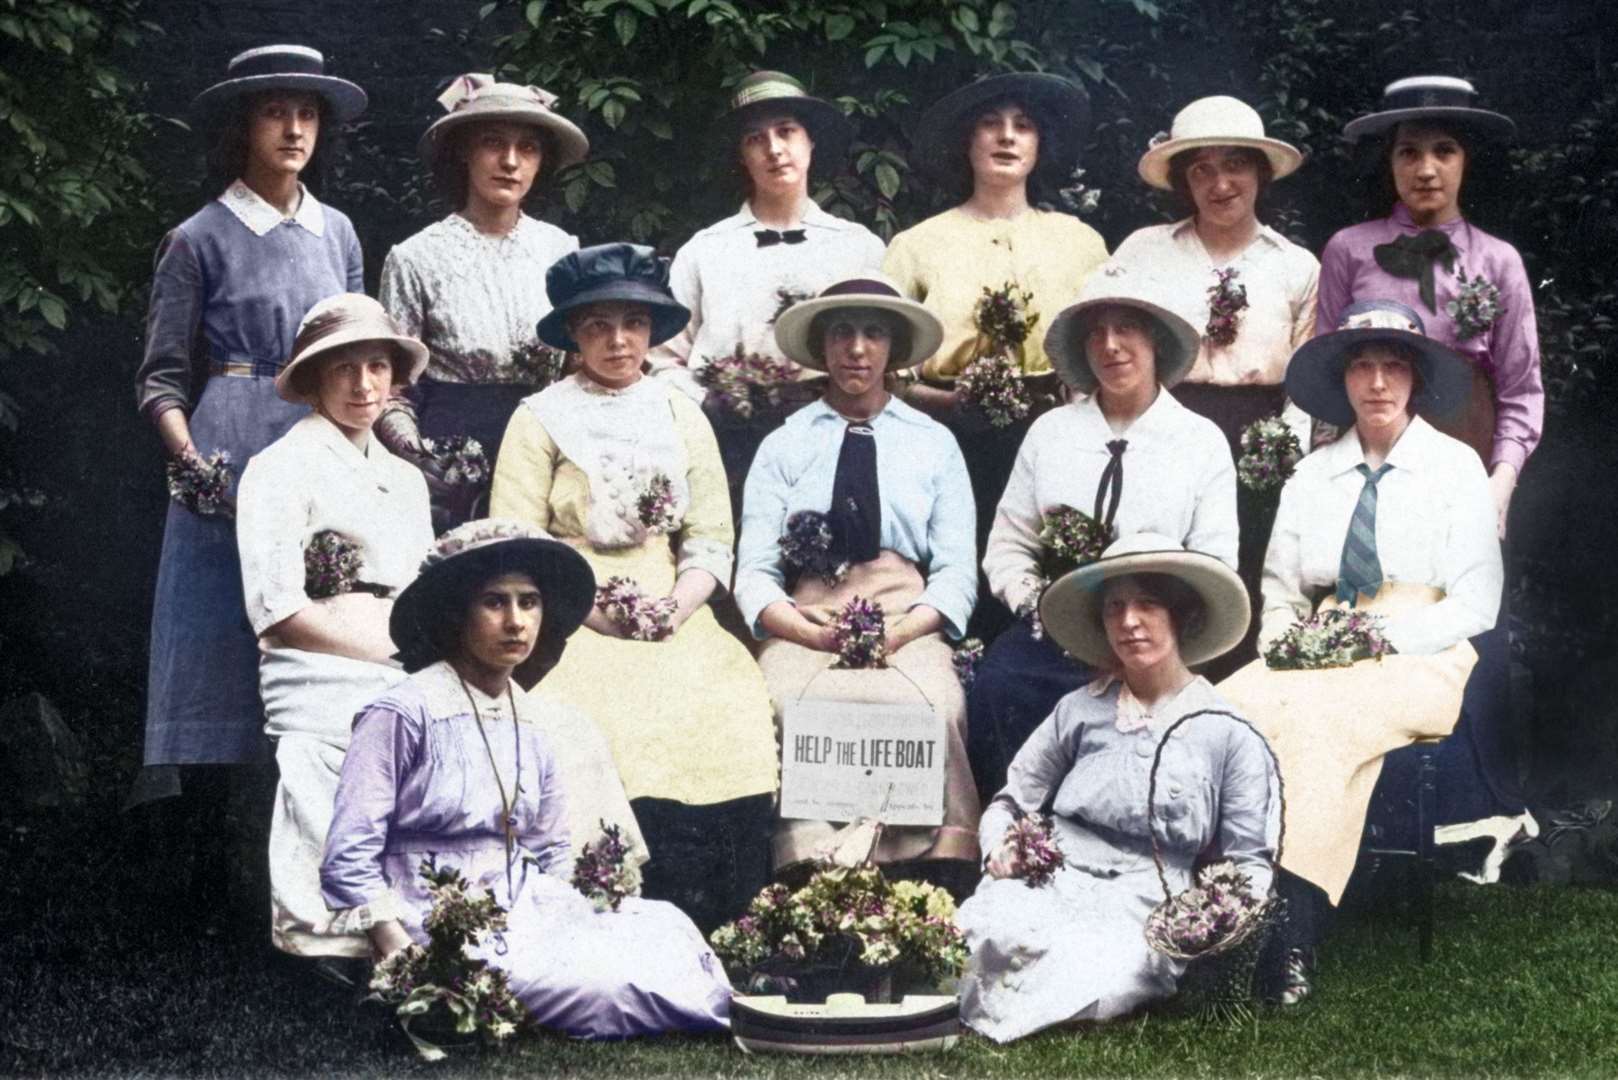 A Ladies’ Guild in 1913 – this image has been painstakingly cleaned and colourised using digital technology to shine new light on 200 years of the RNLI. Image: RNLI.